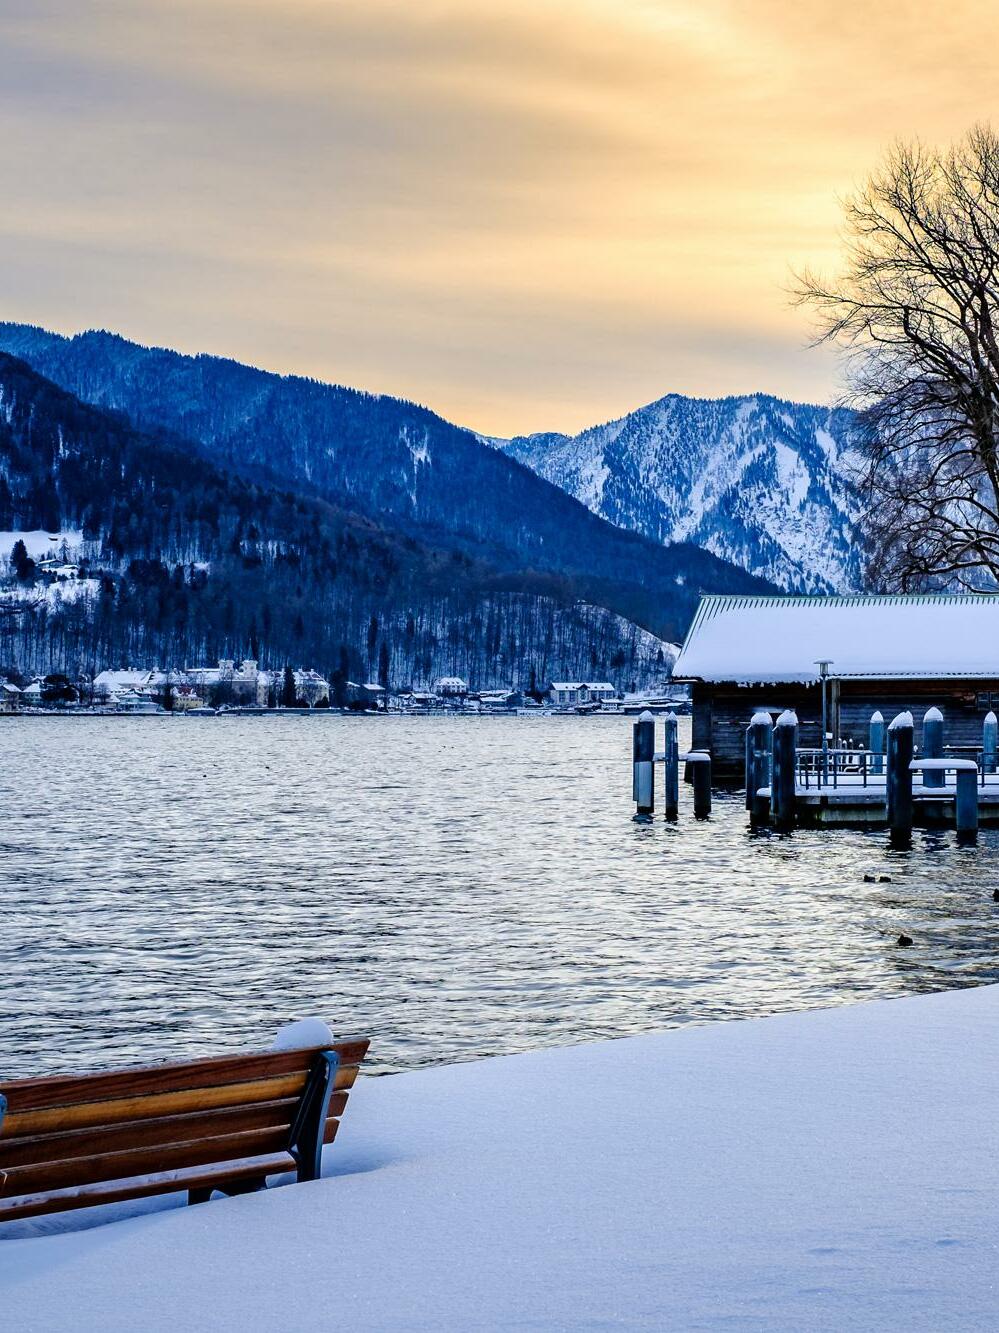 Landscape at the Tegernsee lake - Bad Wiessee © Adobe Stock